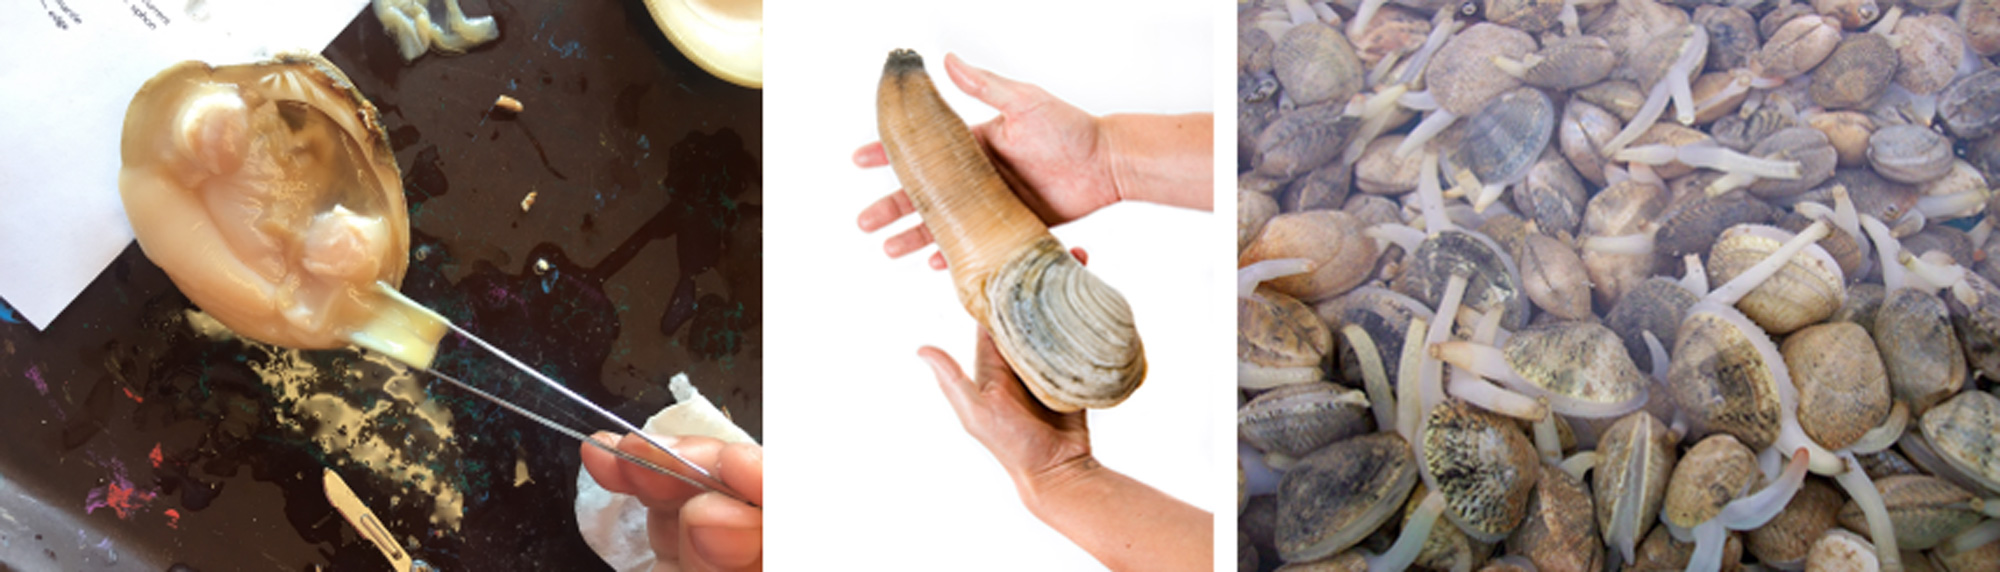 Image showing three photographs of siphons in various bivalves.